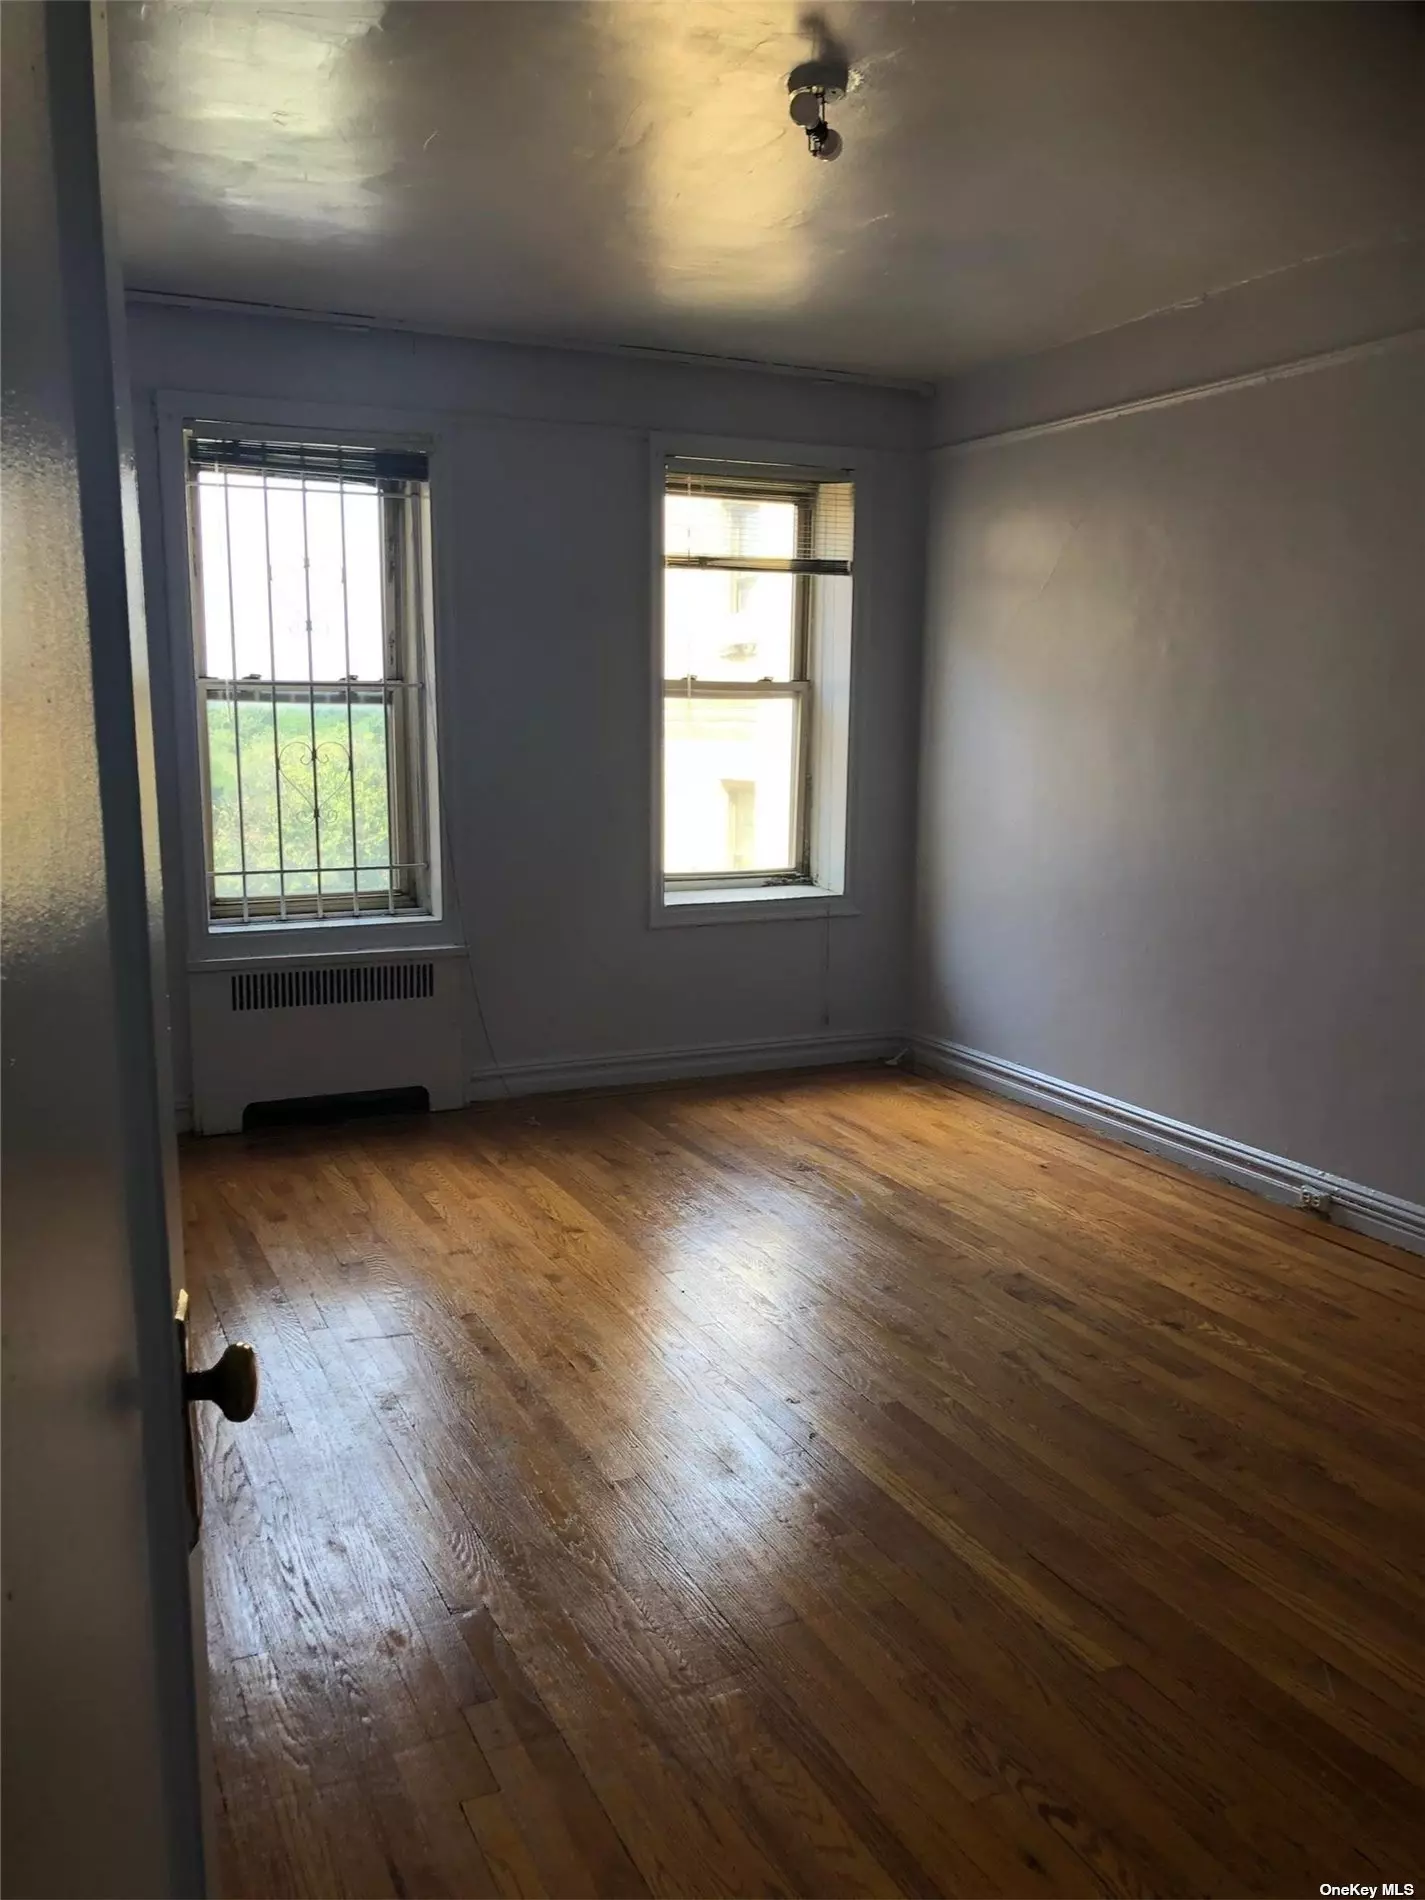 Spacious 1 bedroom, newly painted and renovated wood floors. Well maintained apartment and building in the Pelham Parkway area. Pet friendly with laundry on site. Near the Bronx Zoo! Close to shopping & near major highways for easy commute! Open House 11/4/23 - 12:00-1:30pm. Please call or text Petra to schedule viewing appointment.